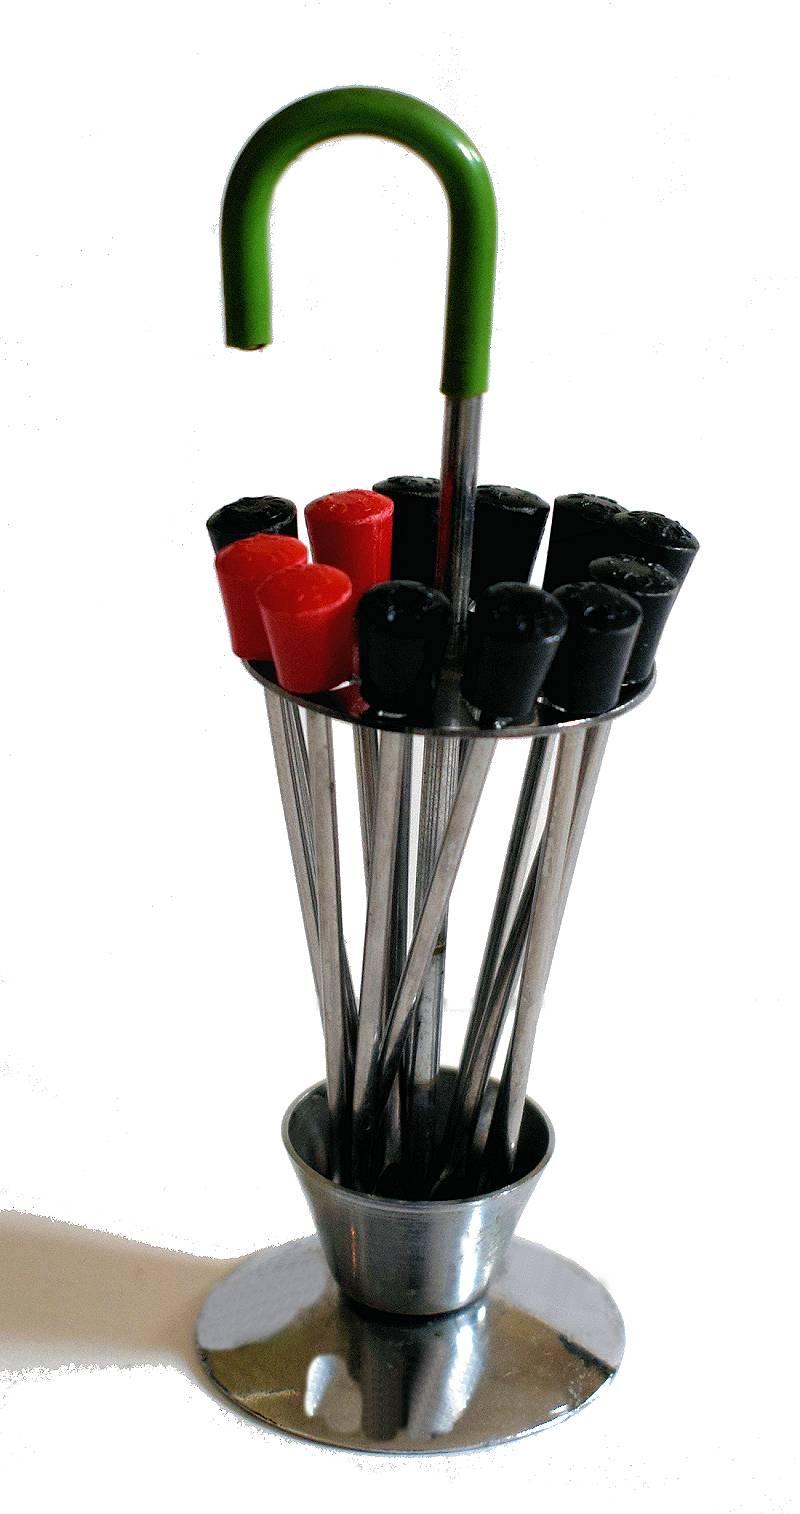 Charming Art Deco novelty cocktail sticks in the form of an umbrella. The whole piece is made from colored bakelite and chrome. Condition is excellent, no flaws to mention. Originates from France and ideal to add to your barware collection.